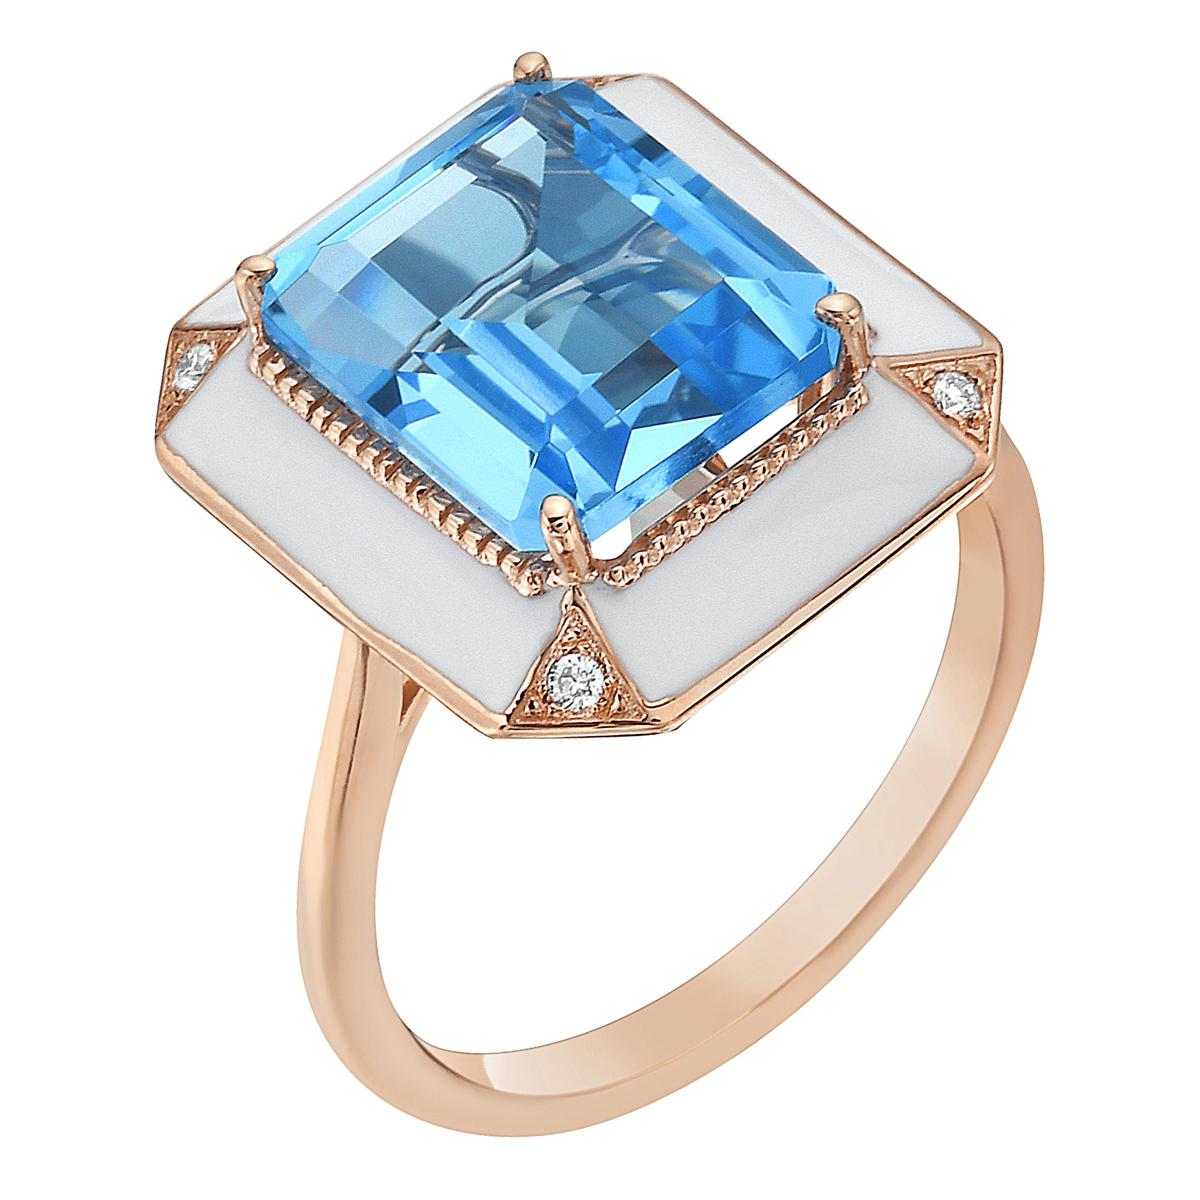 With this exquisite semi-precious blue topaz rose gold diamond ring, style and glamour are in the spotlight. This 18-karat emerald cut ring is made from 3.93 grams of gold, 1 blue topaz totaling 5.81 karats, and is surrounded by white enamel and has